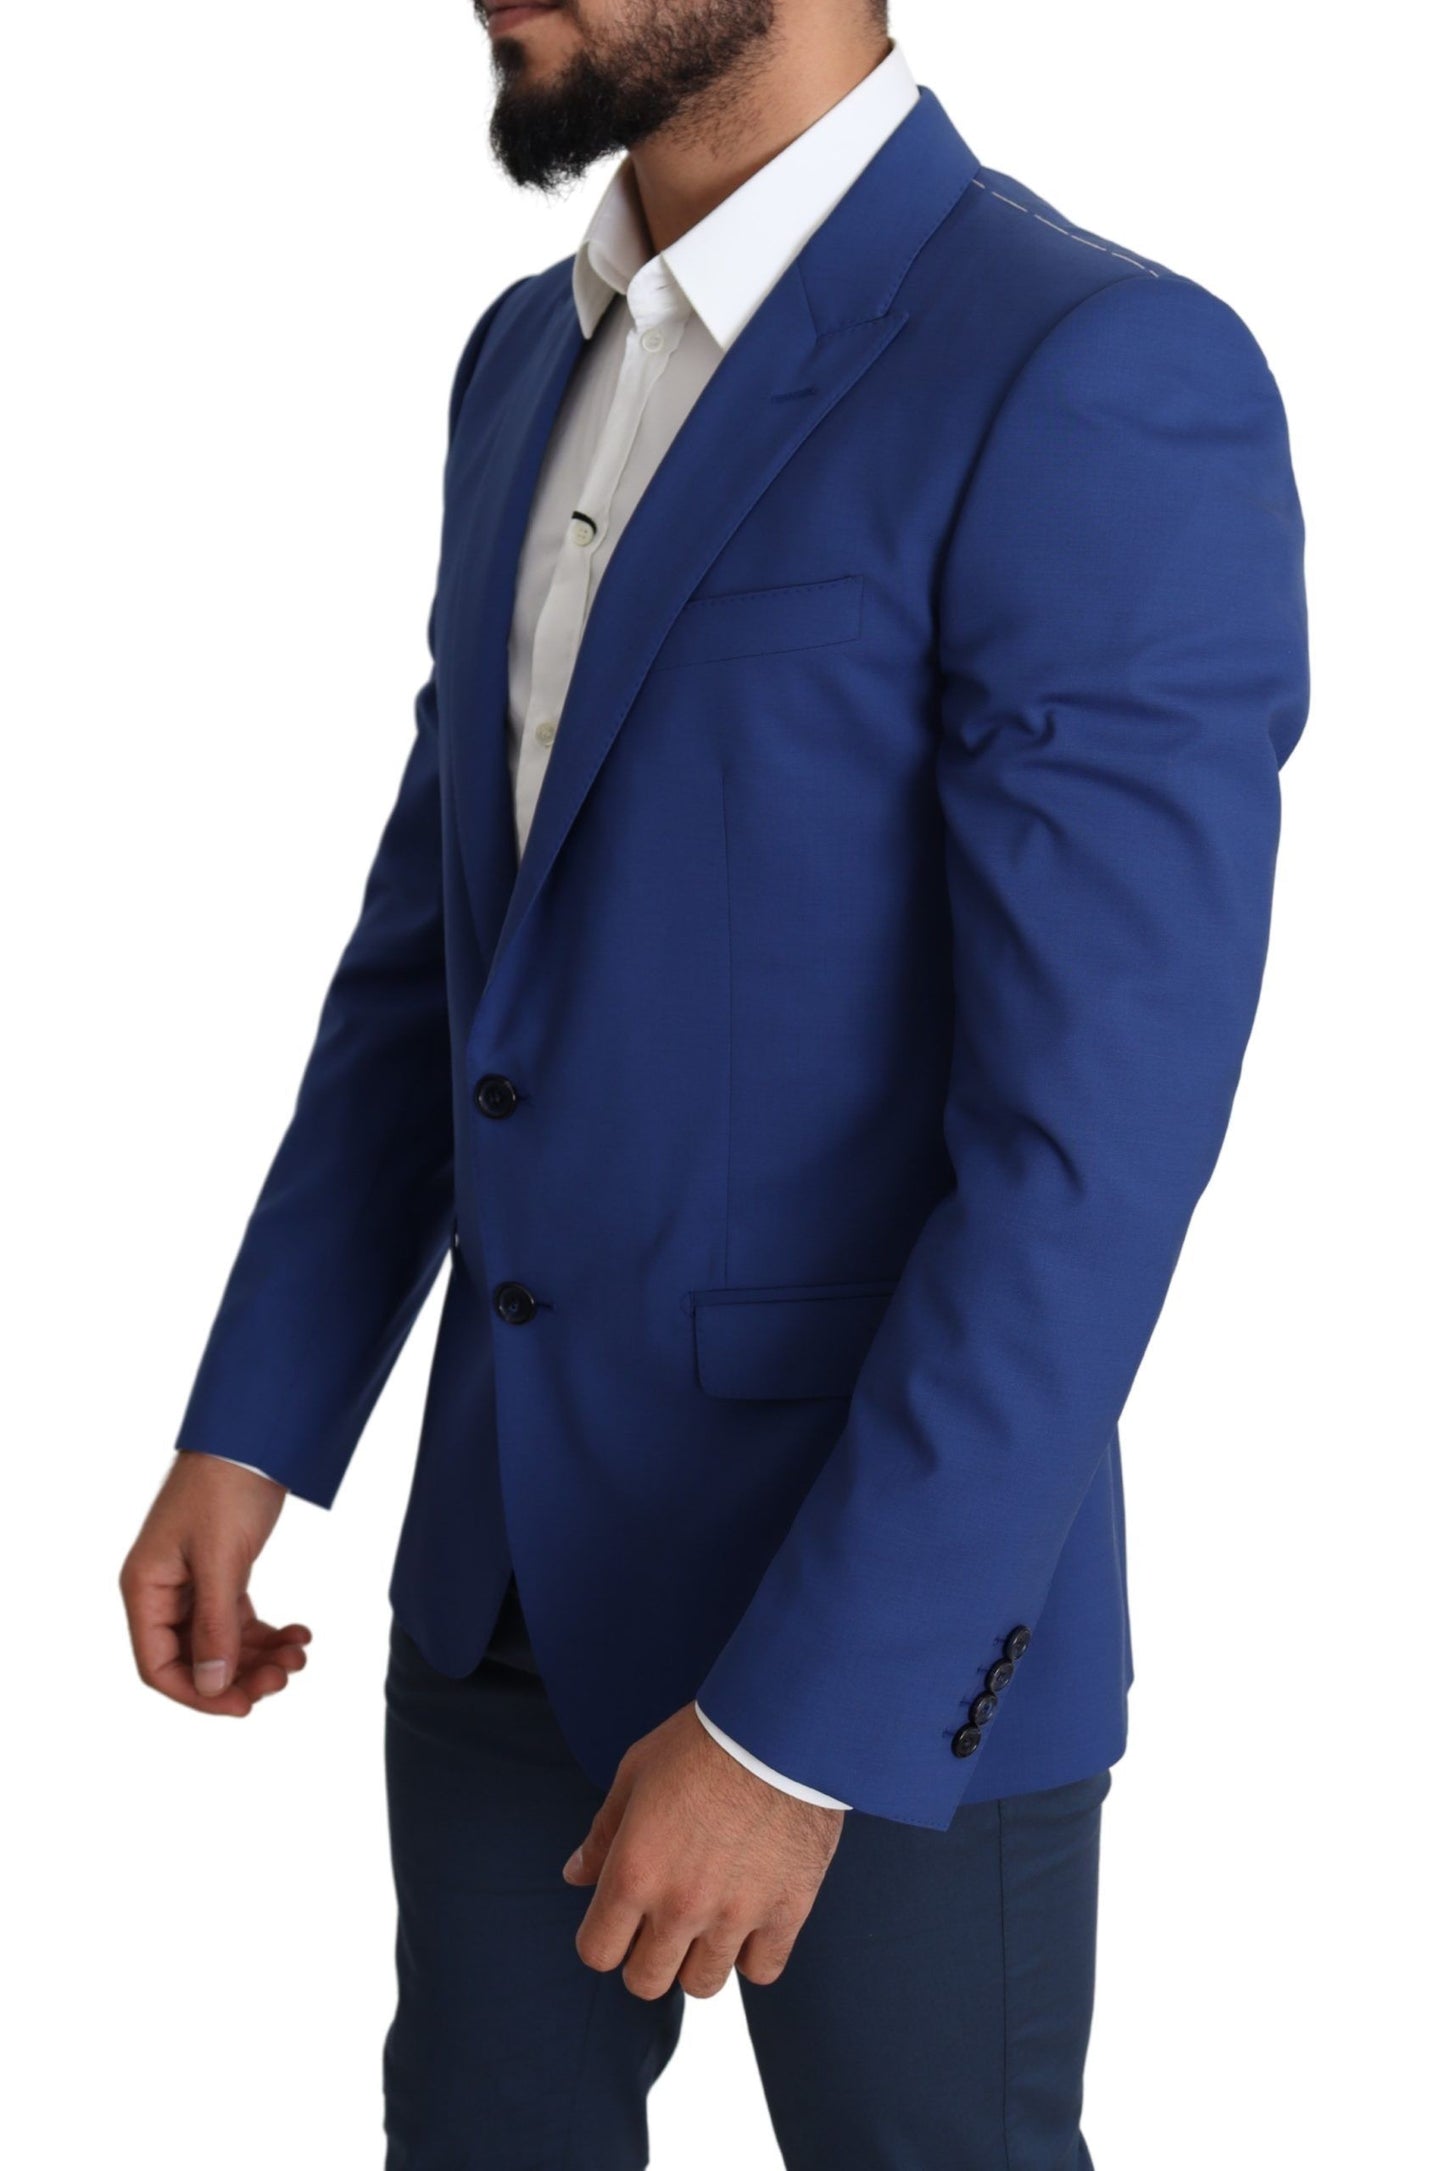 Blue Wool Single Breasted Coat MARTINI Blazer - Designed by Dolce & Gabbana Available to Buy at a Discounted Price on Moon Behind The Hill Online Designer Discount Store